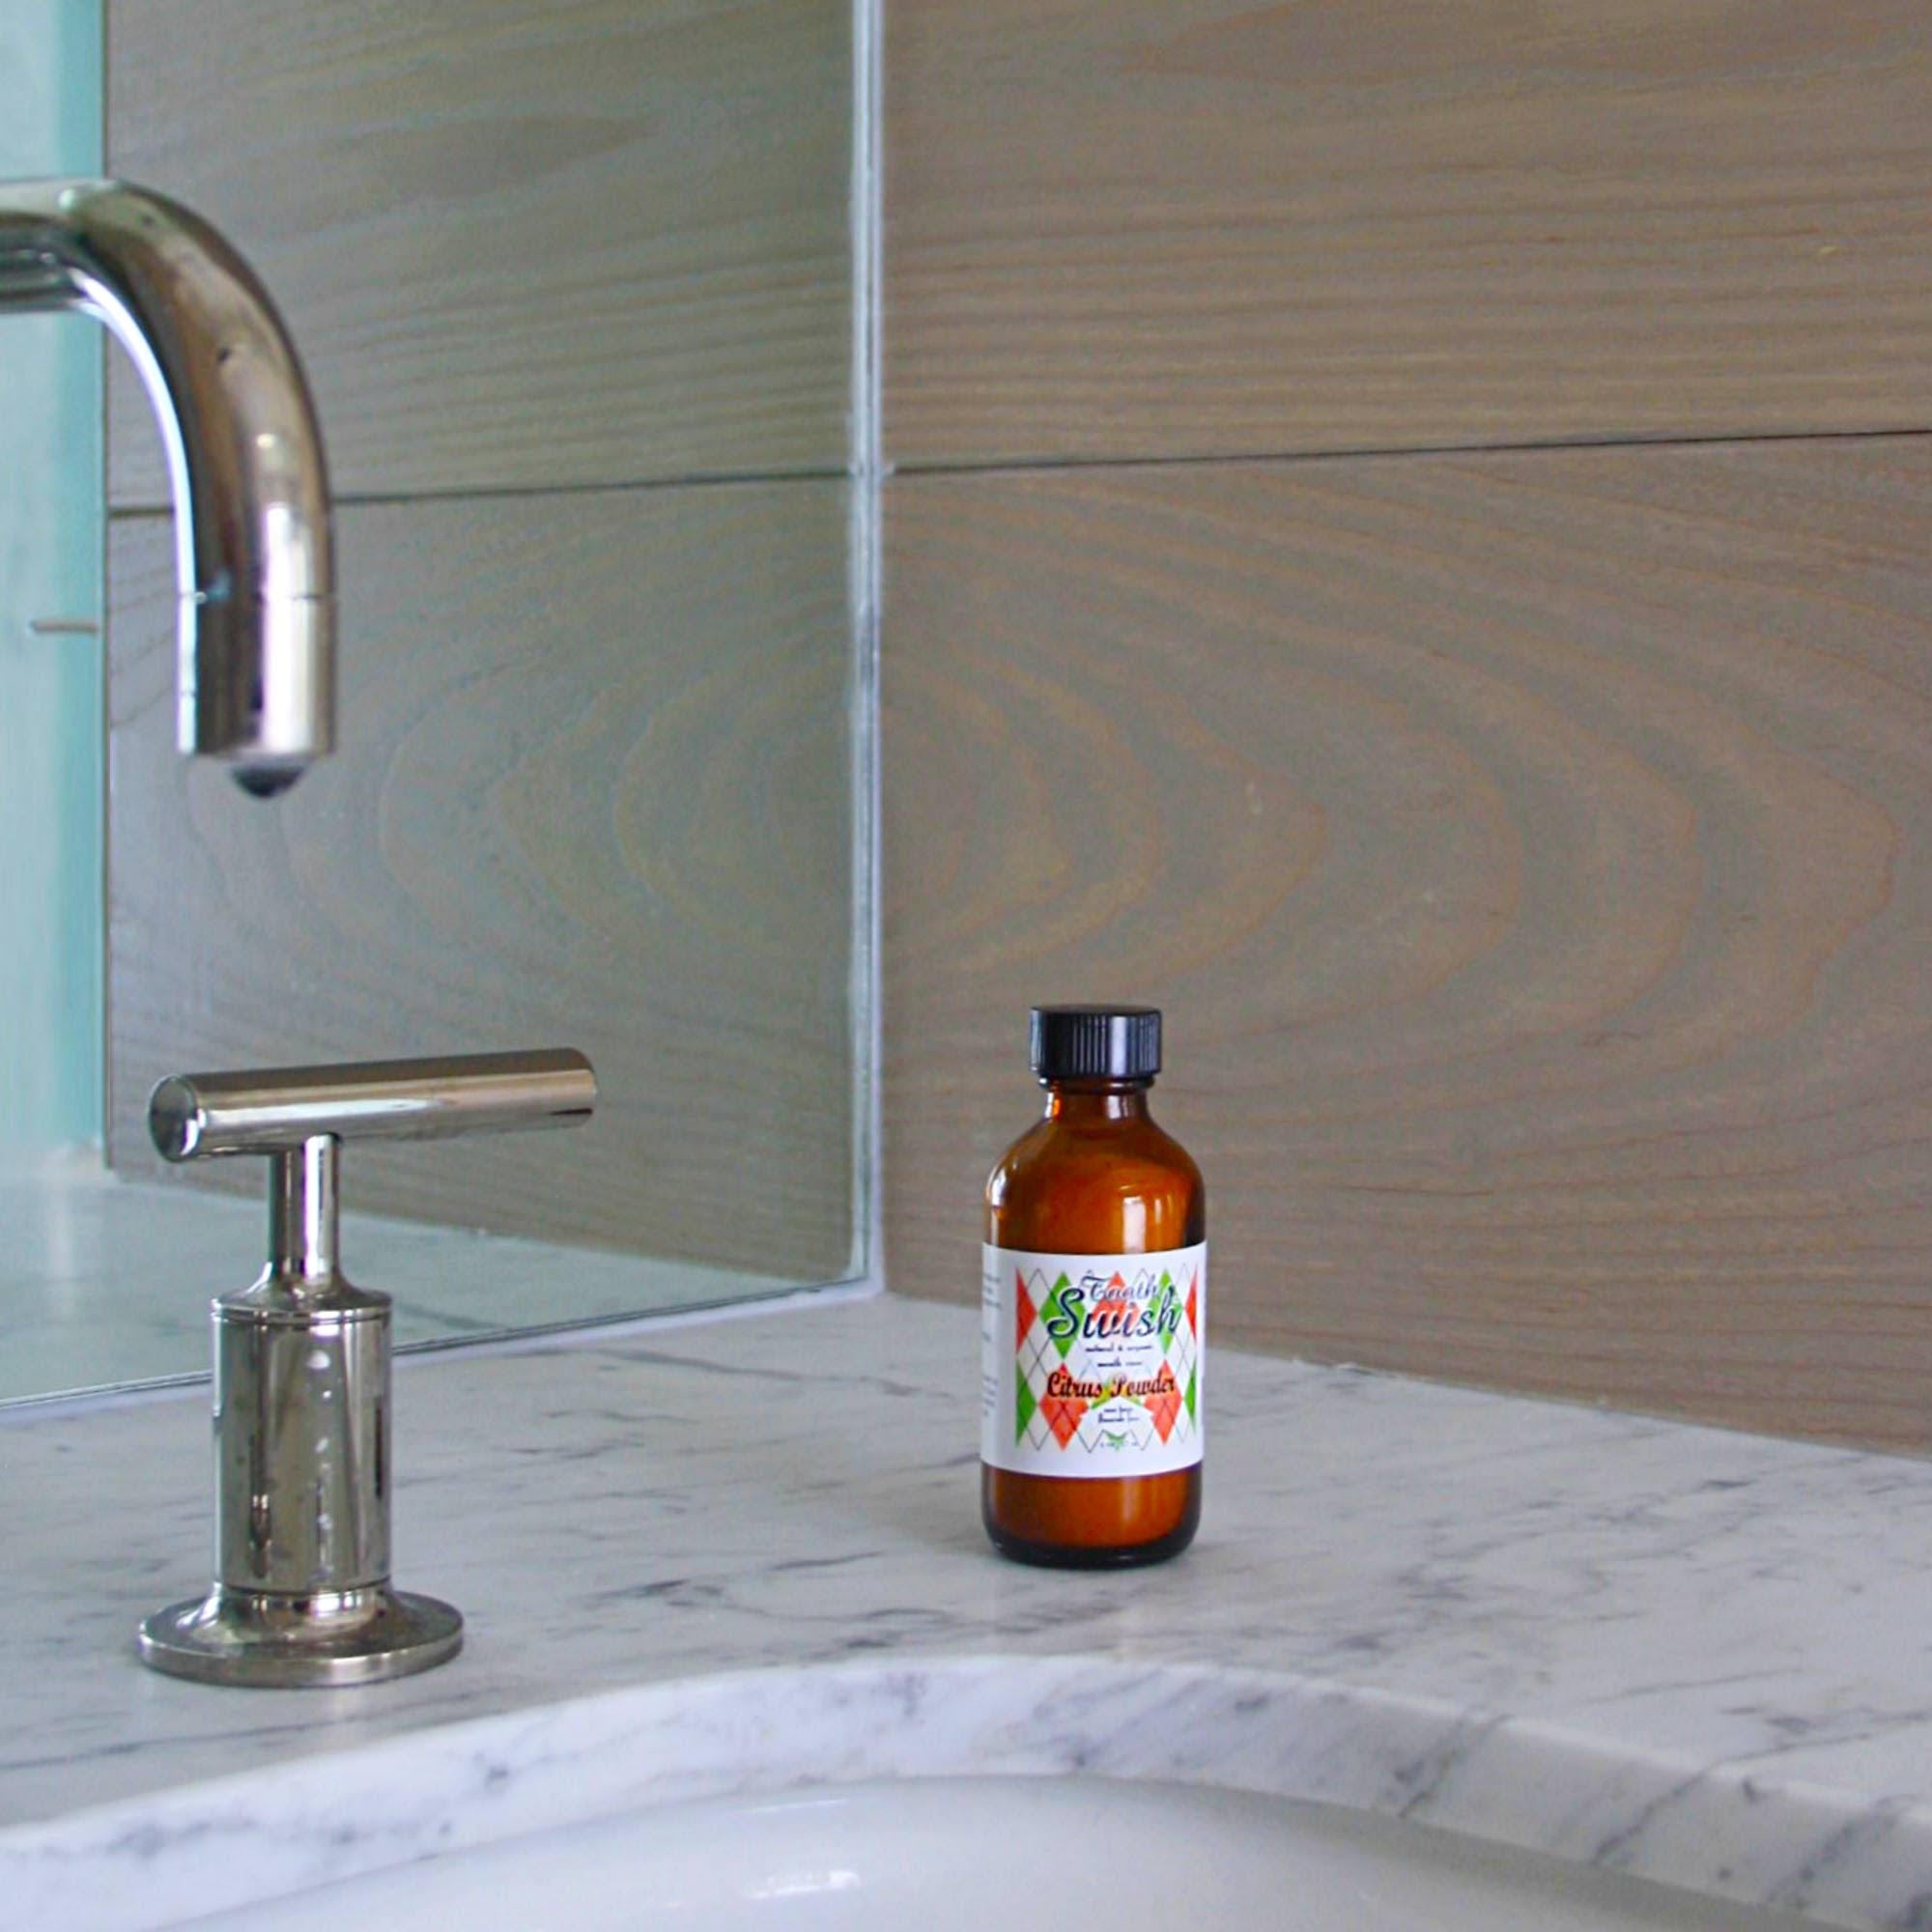 Citrus Tooth Swish brown bottle with black cap with orange, green and white label, resting on sink ledge with metal faucet, on gray sink ledge, and brown wood wall and mirrored background 